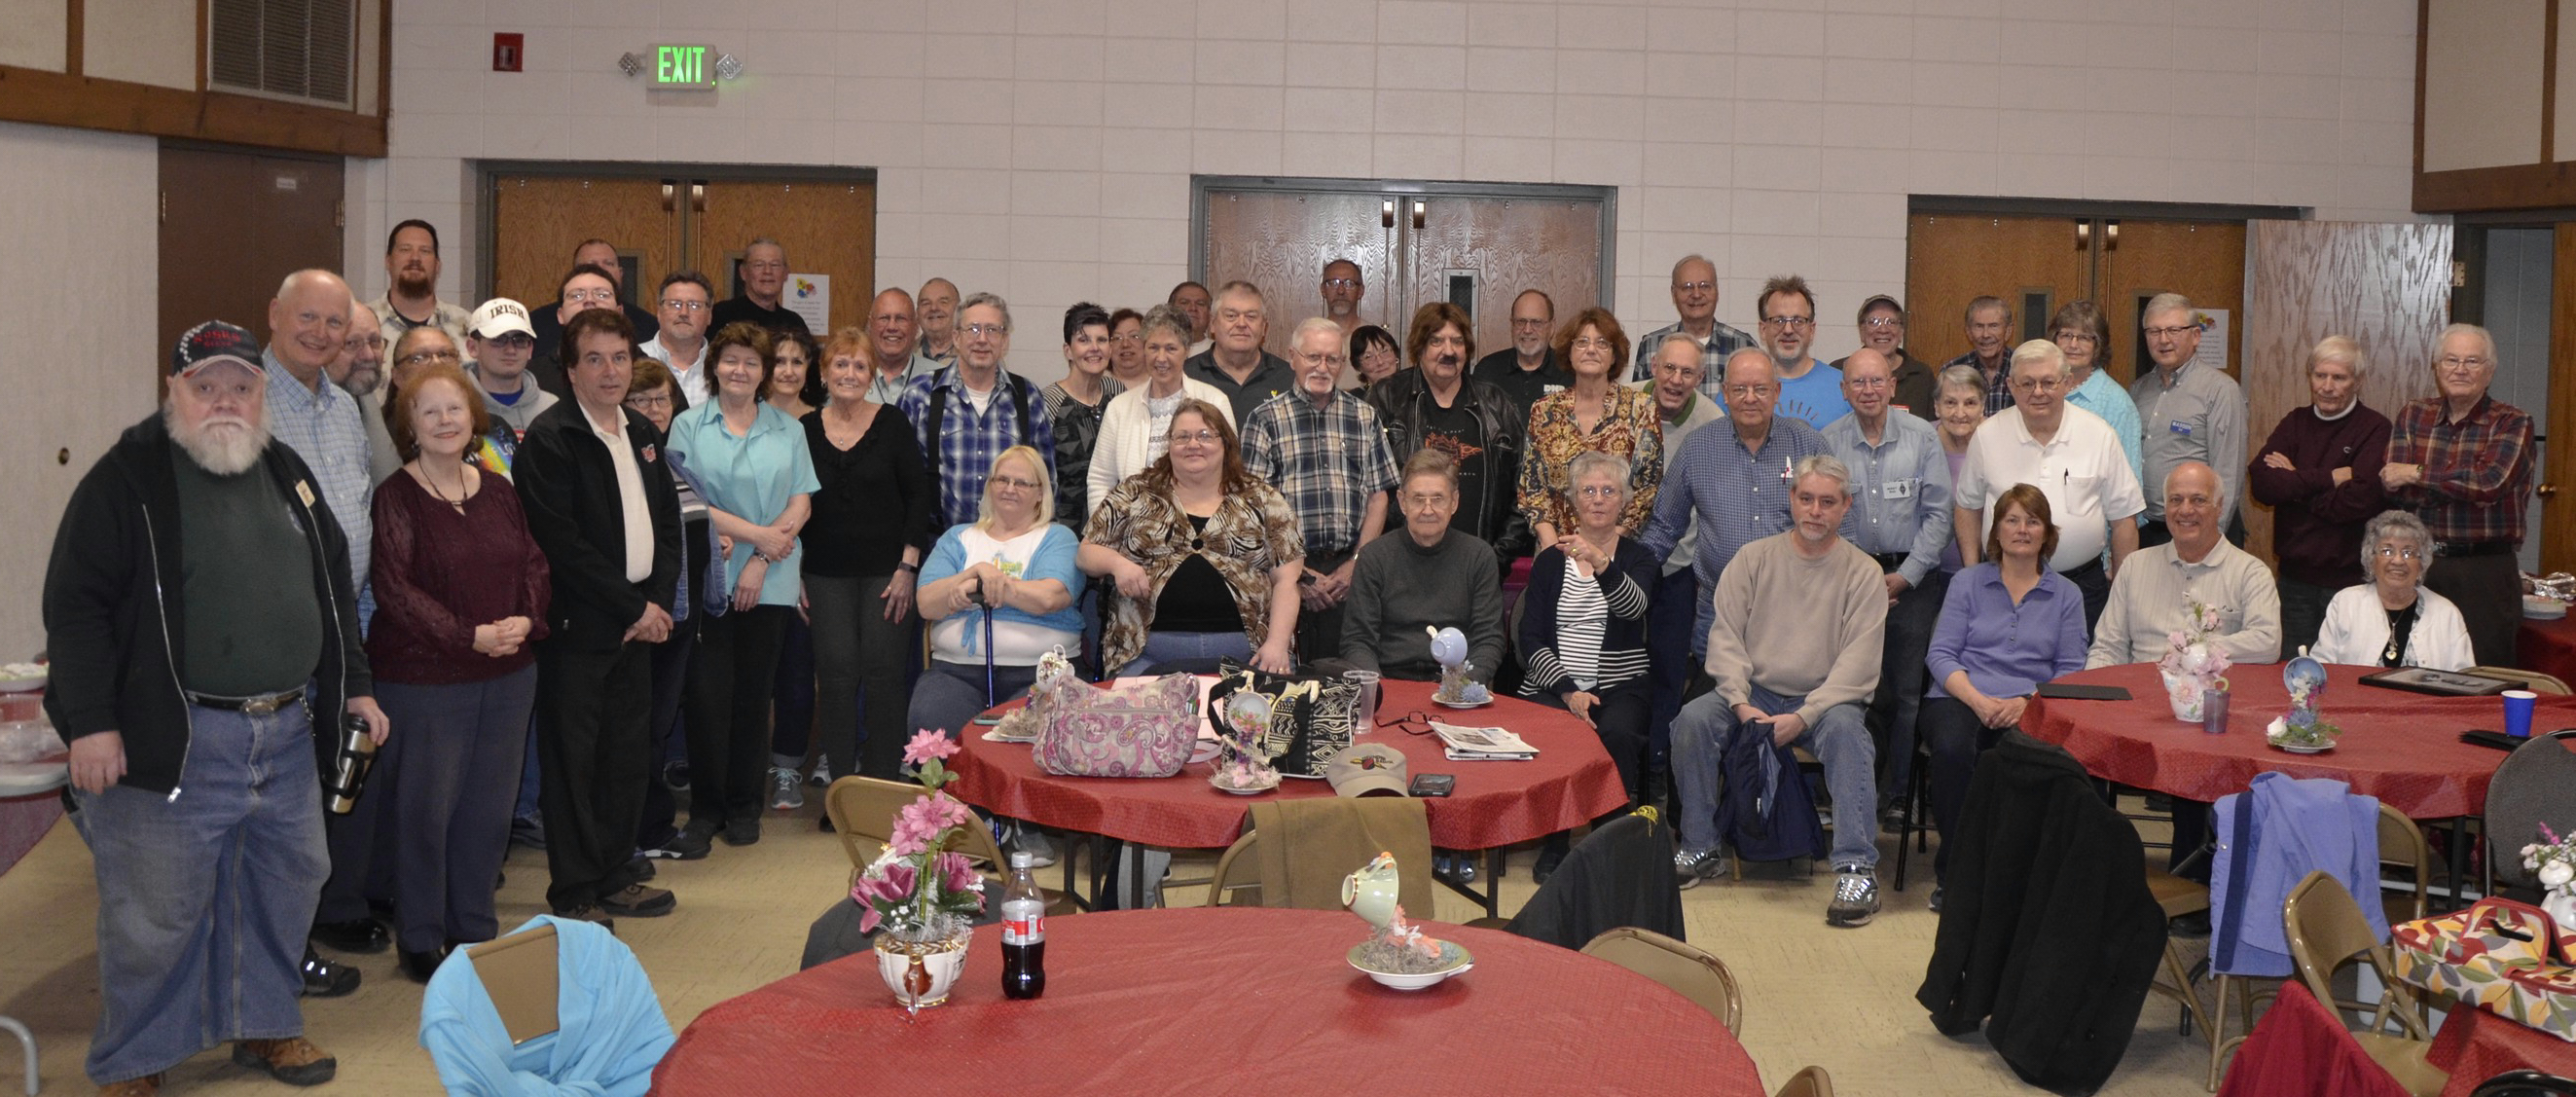 Group photo of FWRC members at 2018 spring banquet